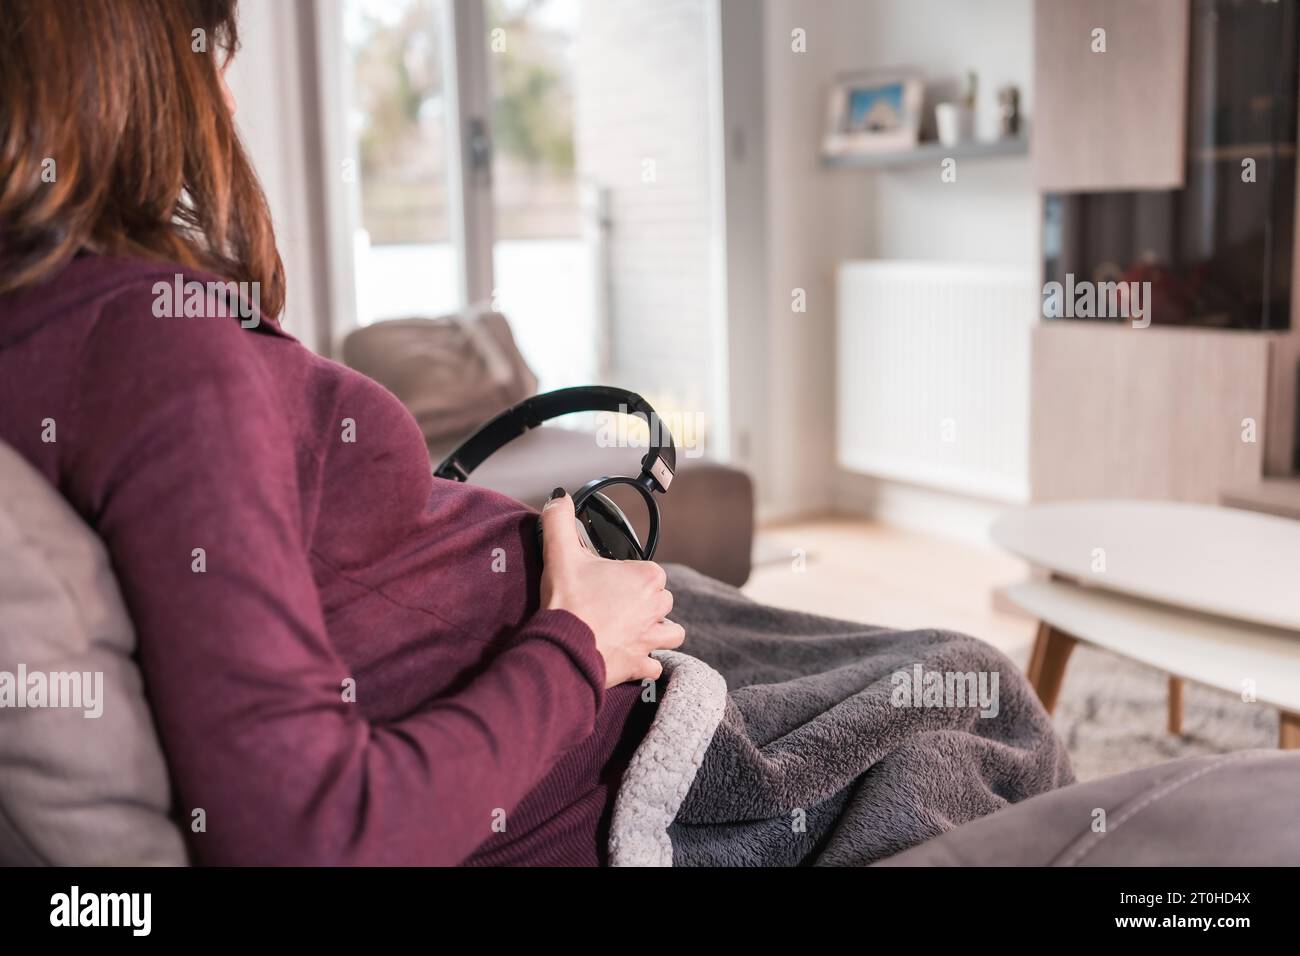 Detail of a young pregnant Caucasian woman connecting with the child putting music with headphones, in the well-being of her home Stock Photo